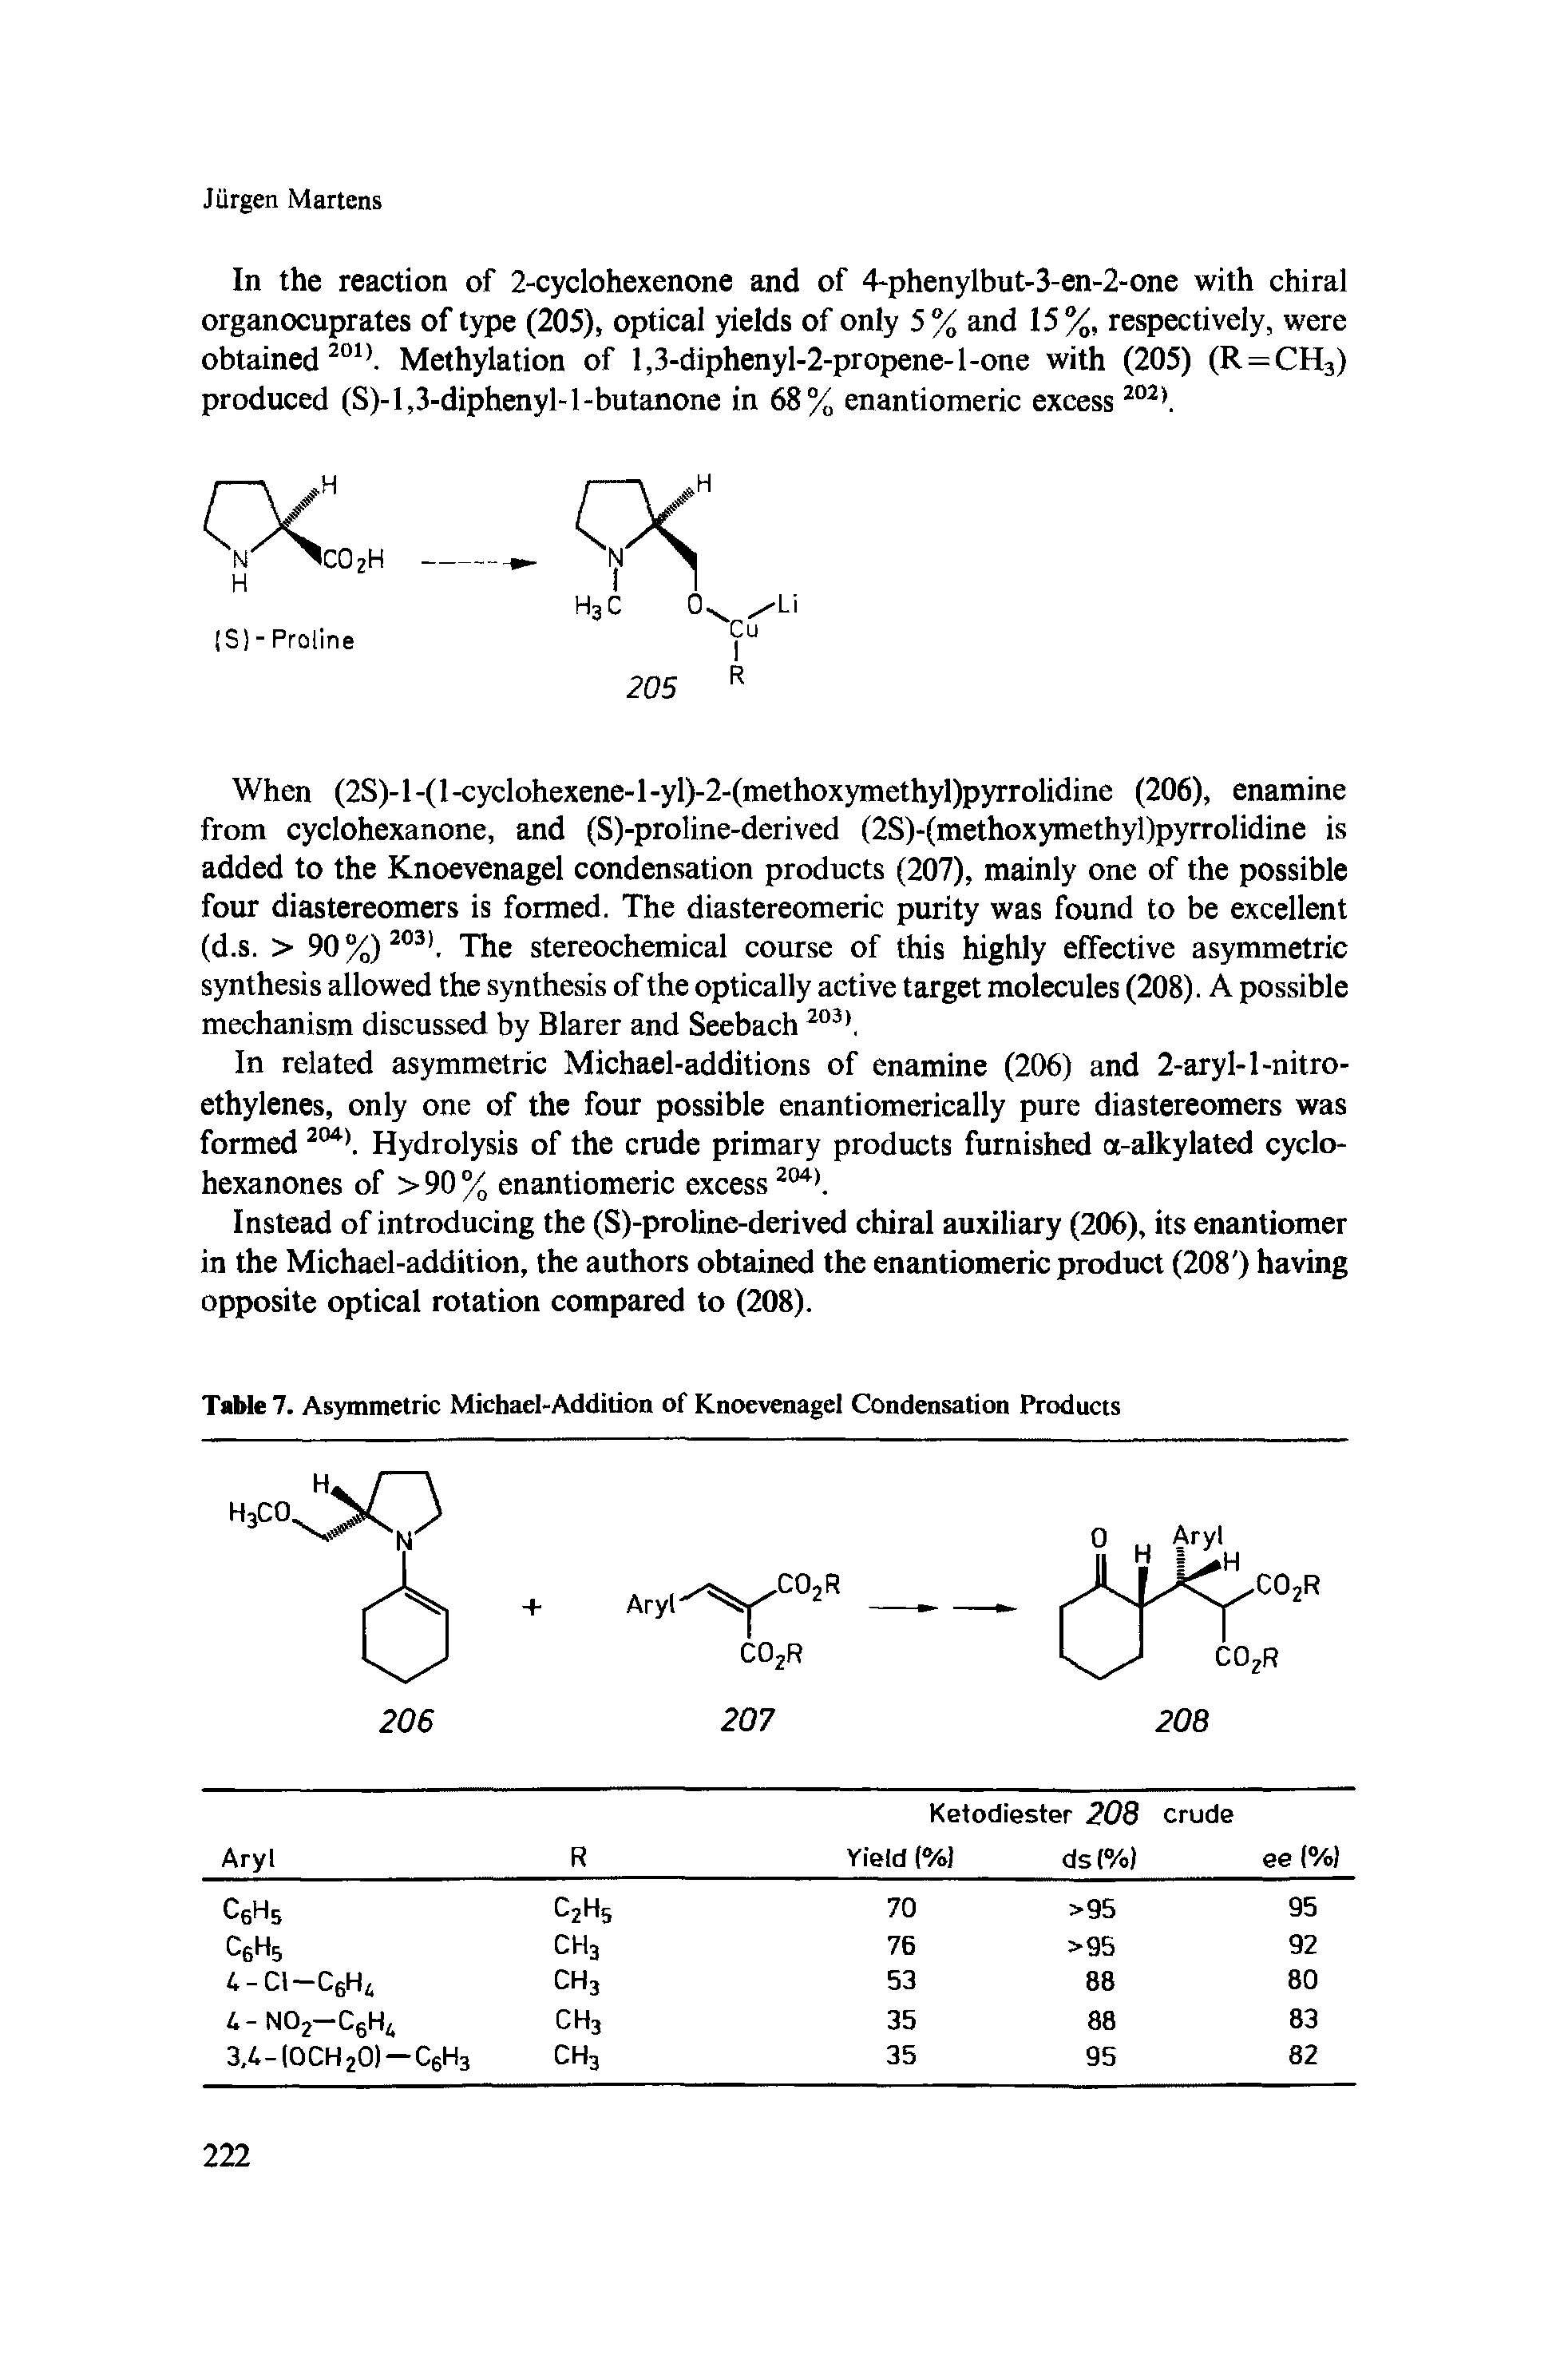 Table 7. Asymmetric Michael-Addition of Knoevenagel Condensation Products...